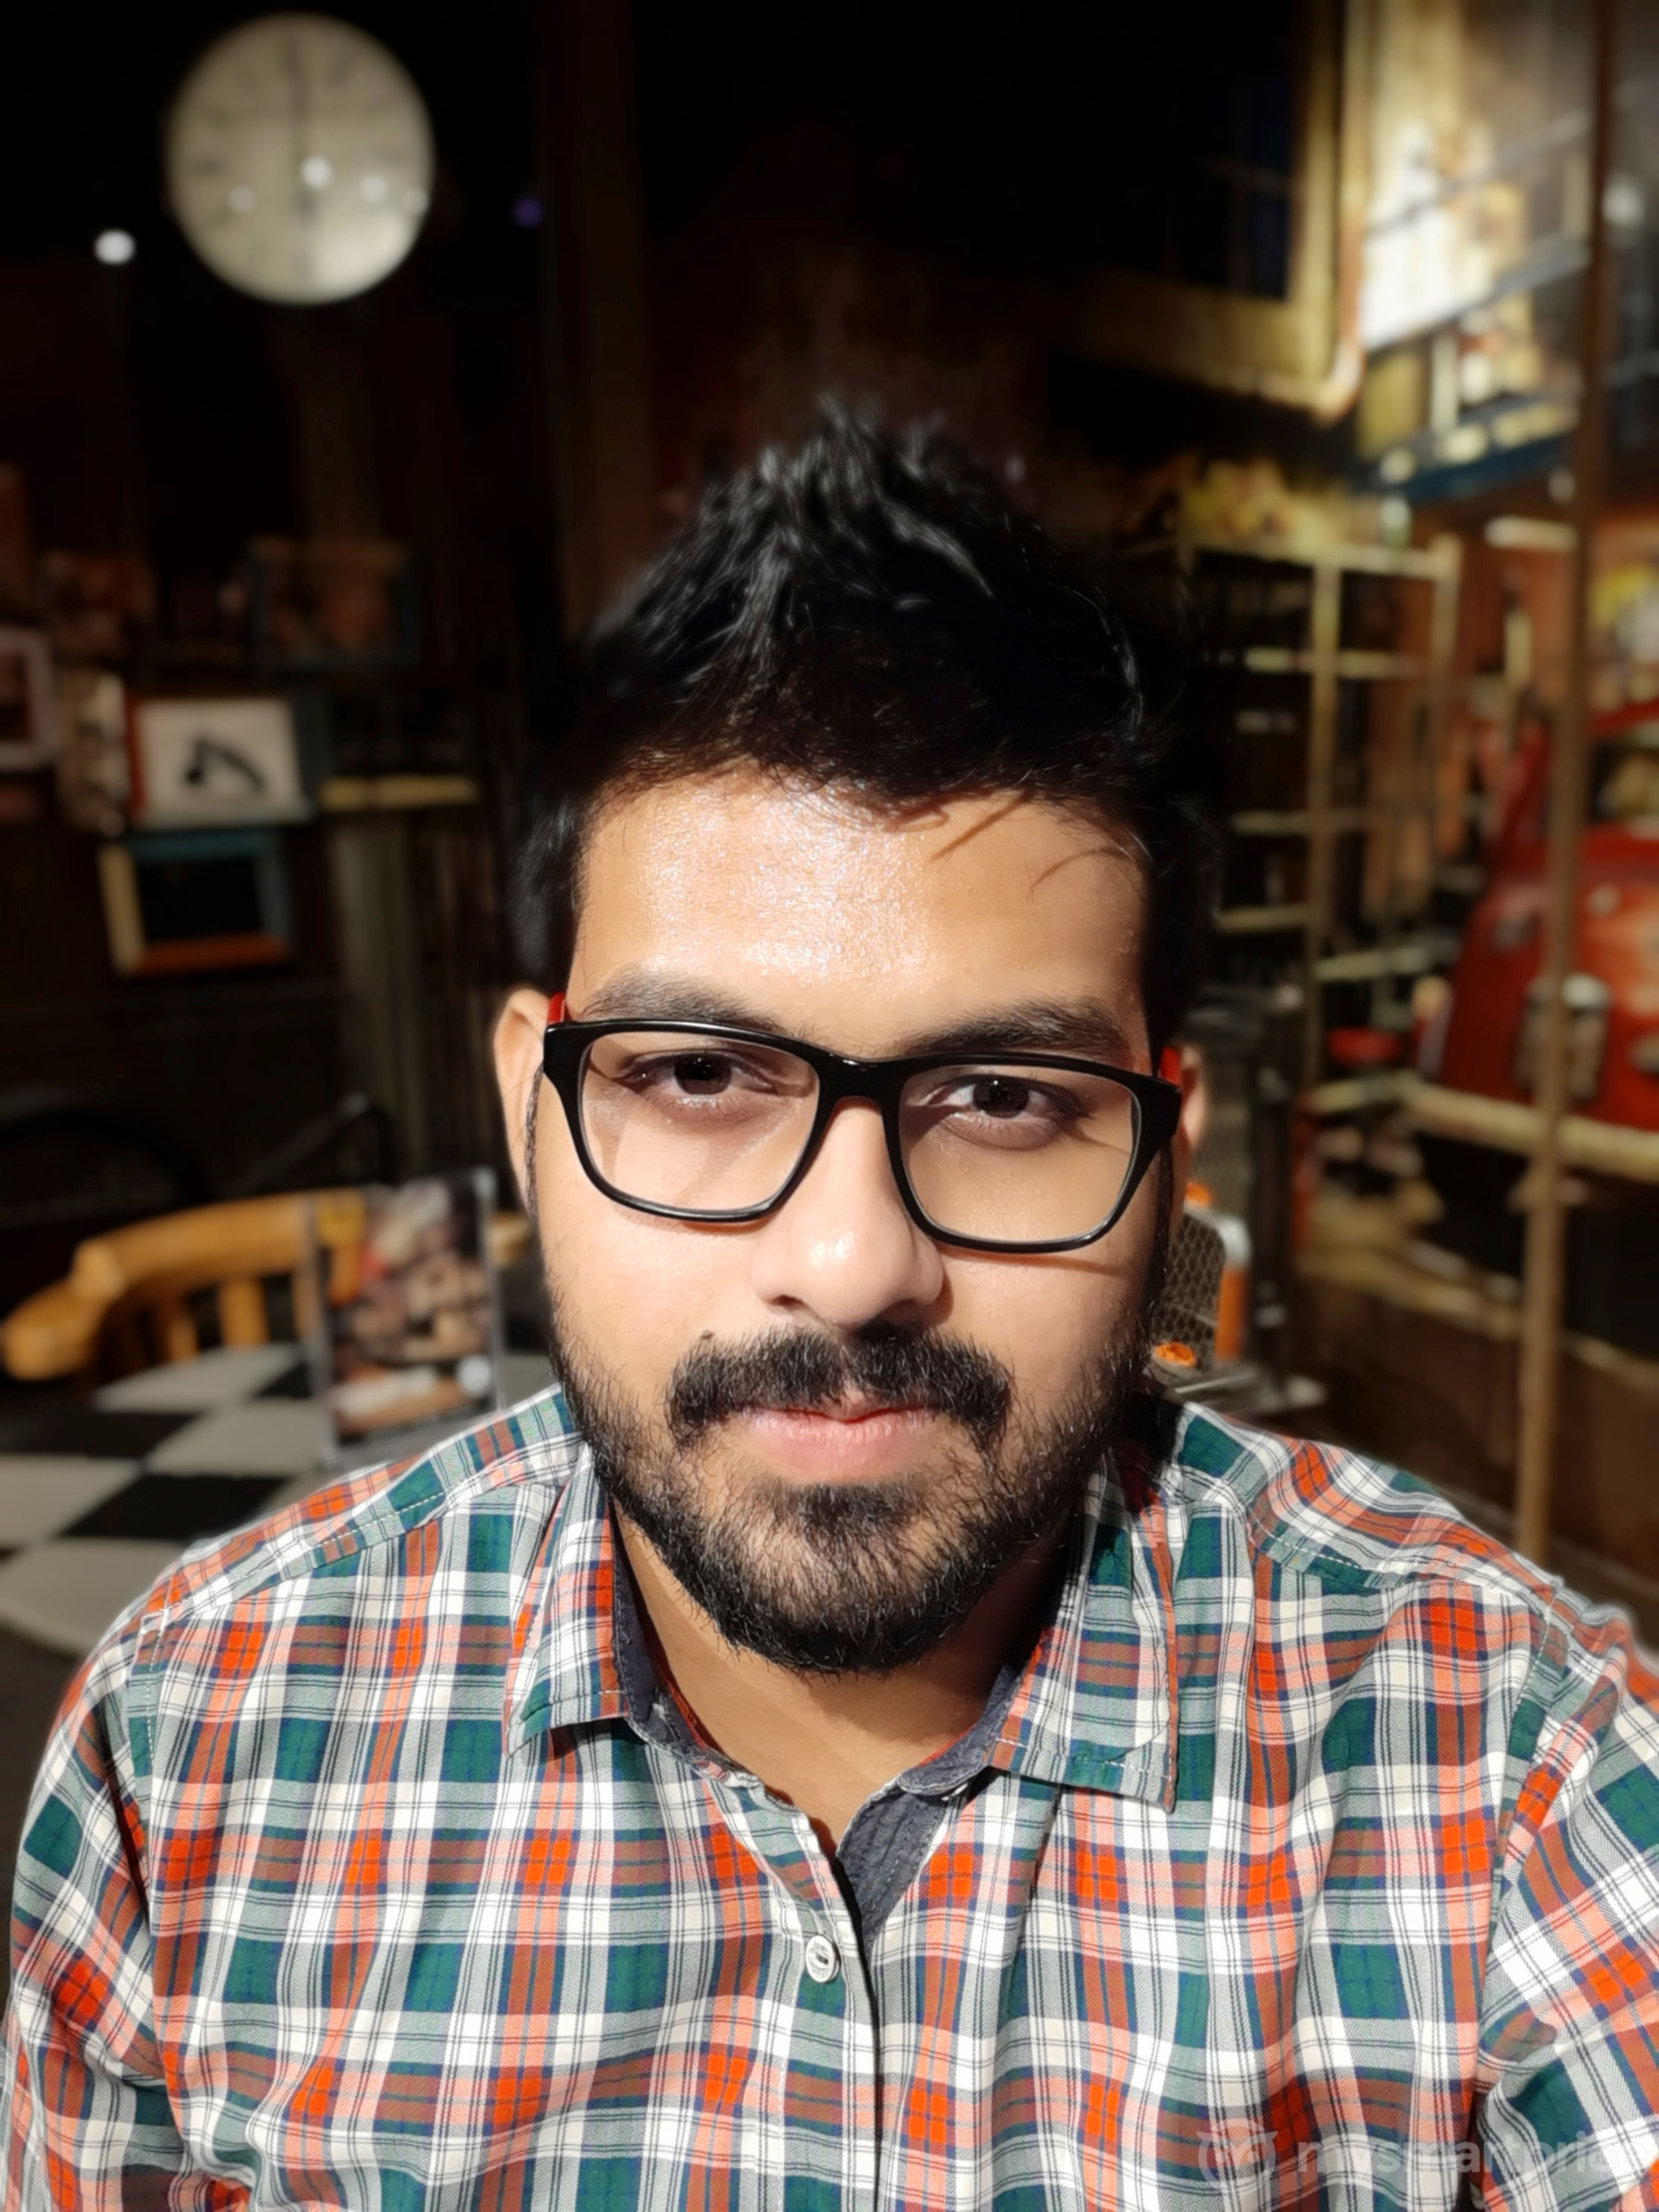 Samsung Galaxy M30 Review - Front-facing Camera Sample 08 (Portrait Mode On)